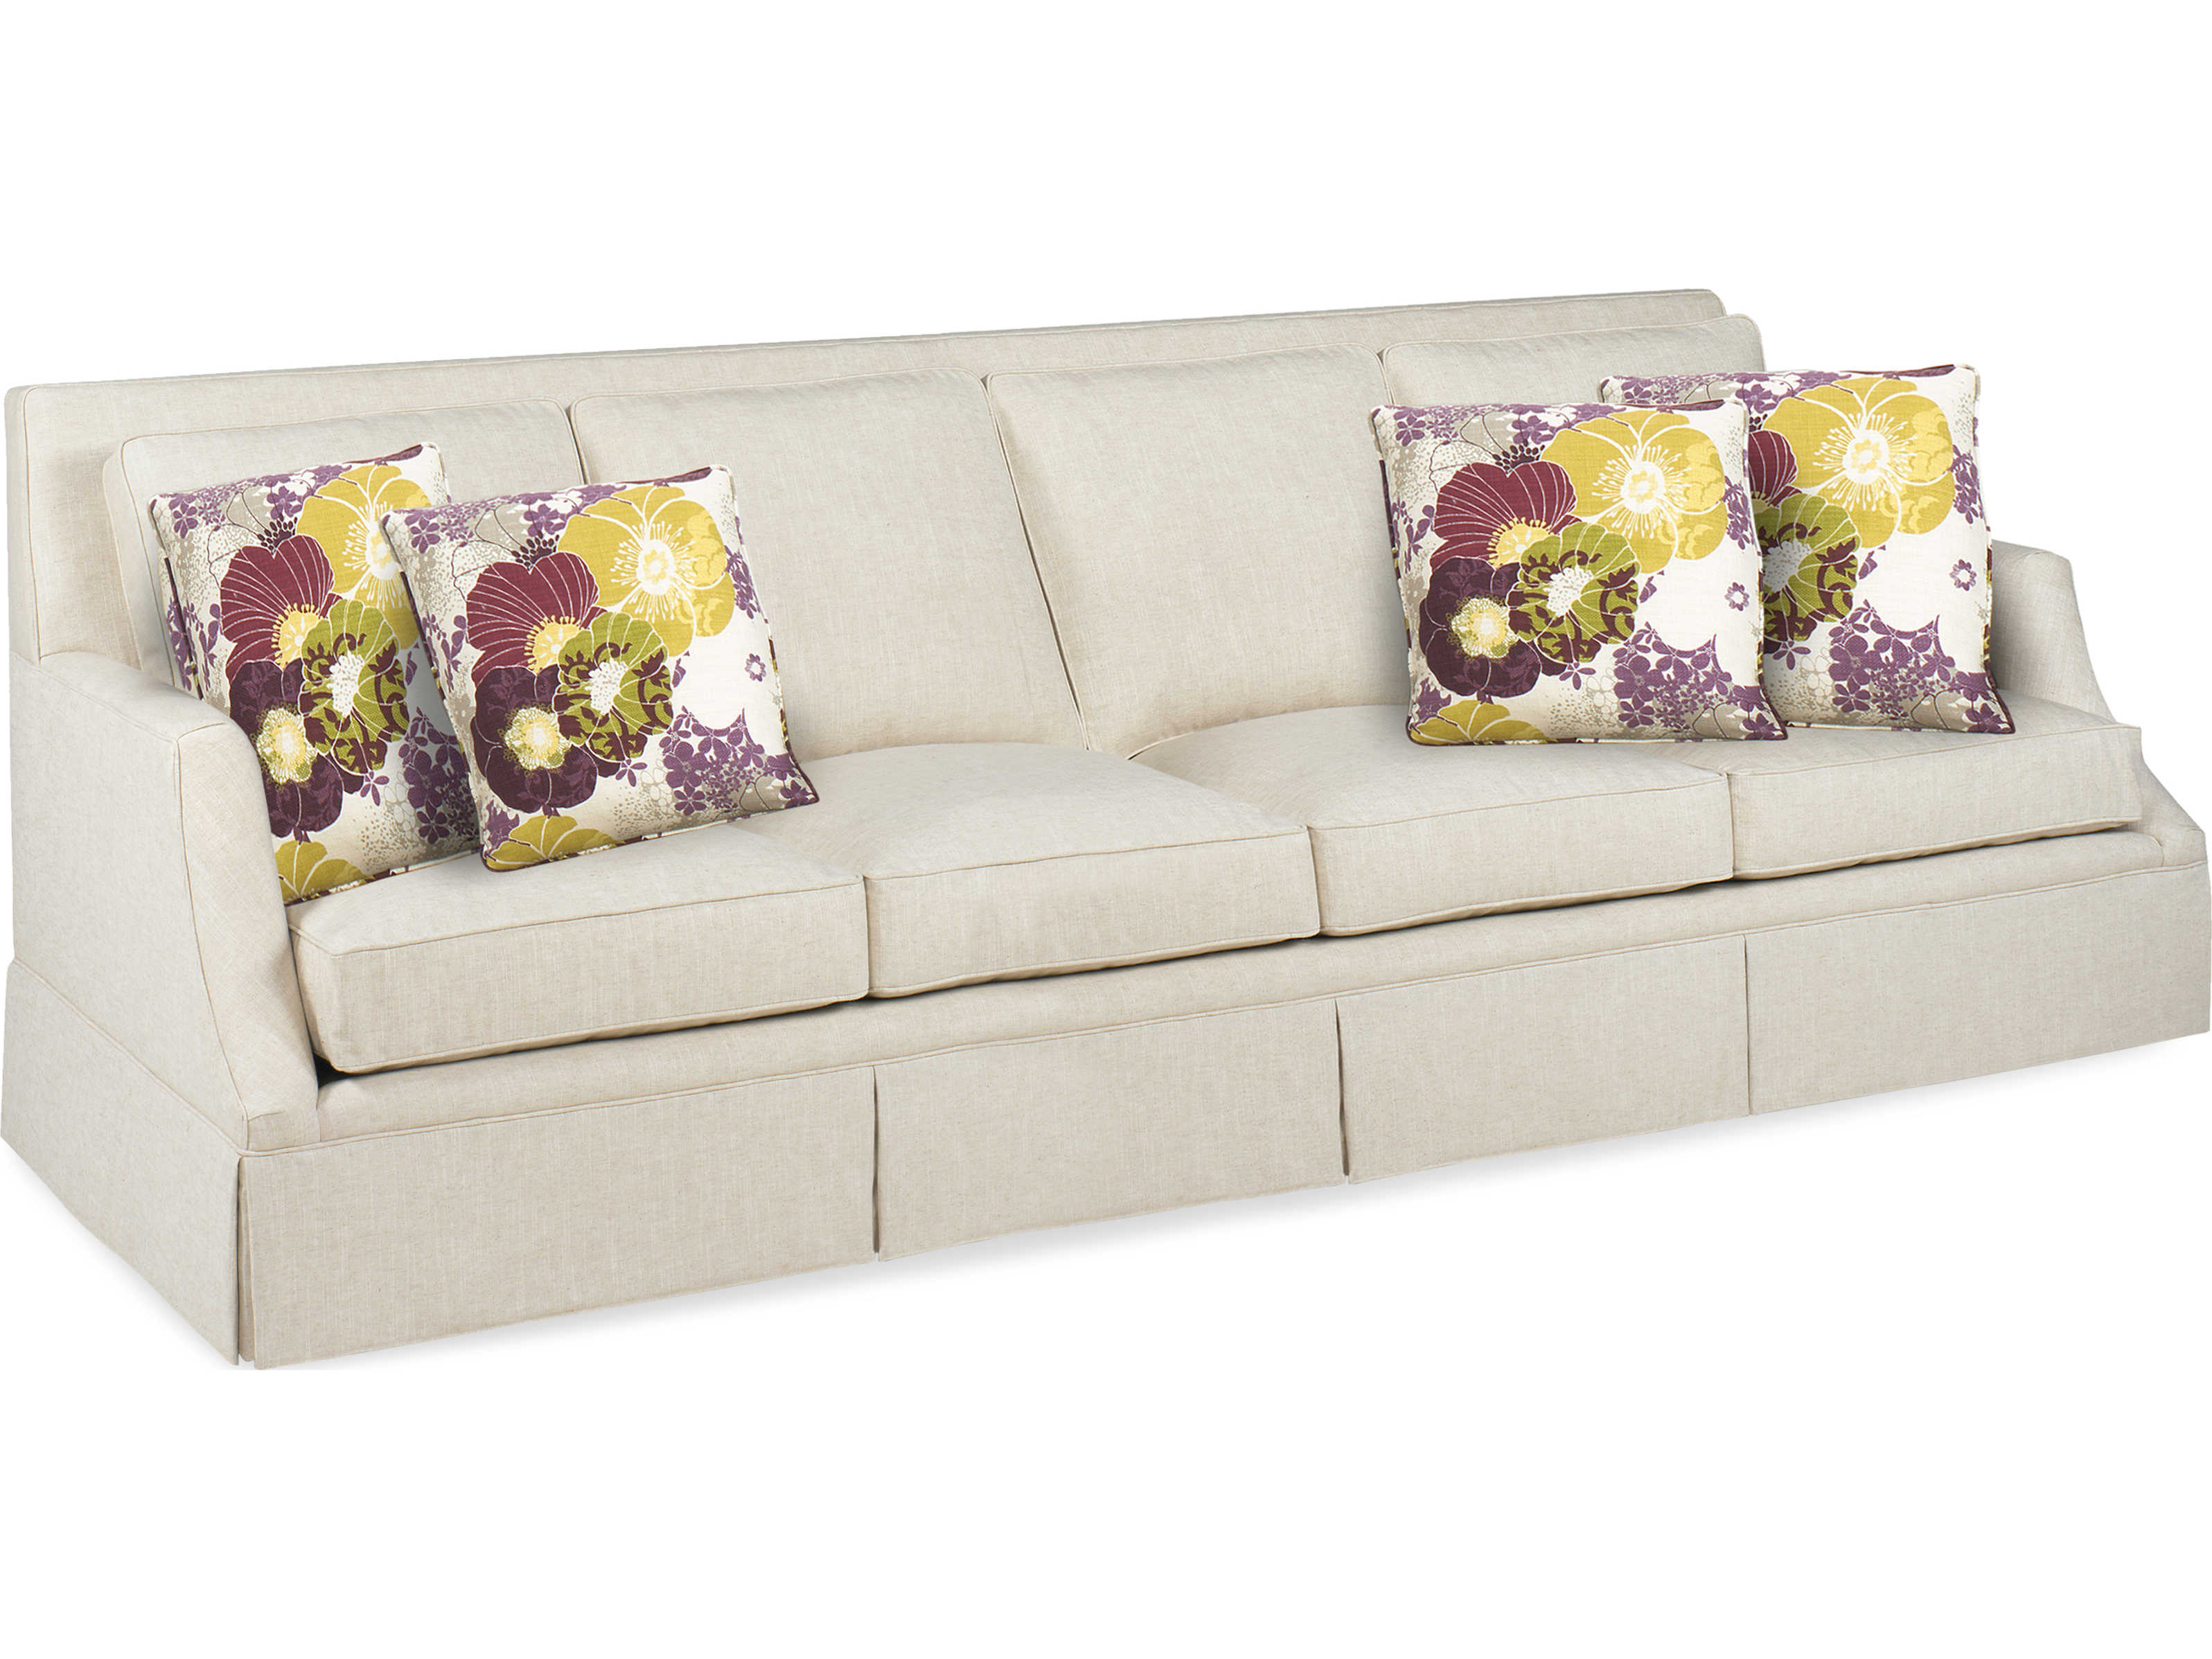 Temple Furniture Cadence 108 Wide Sofa Couch Tmf3800108